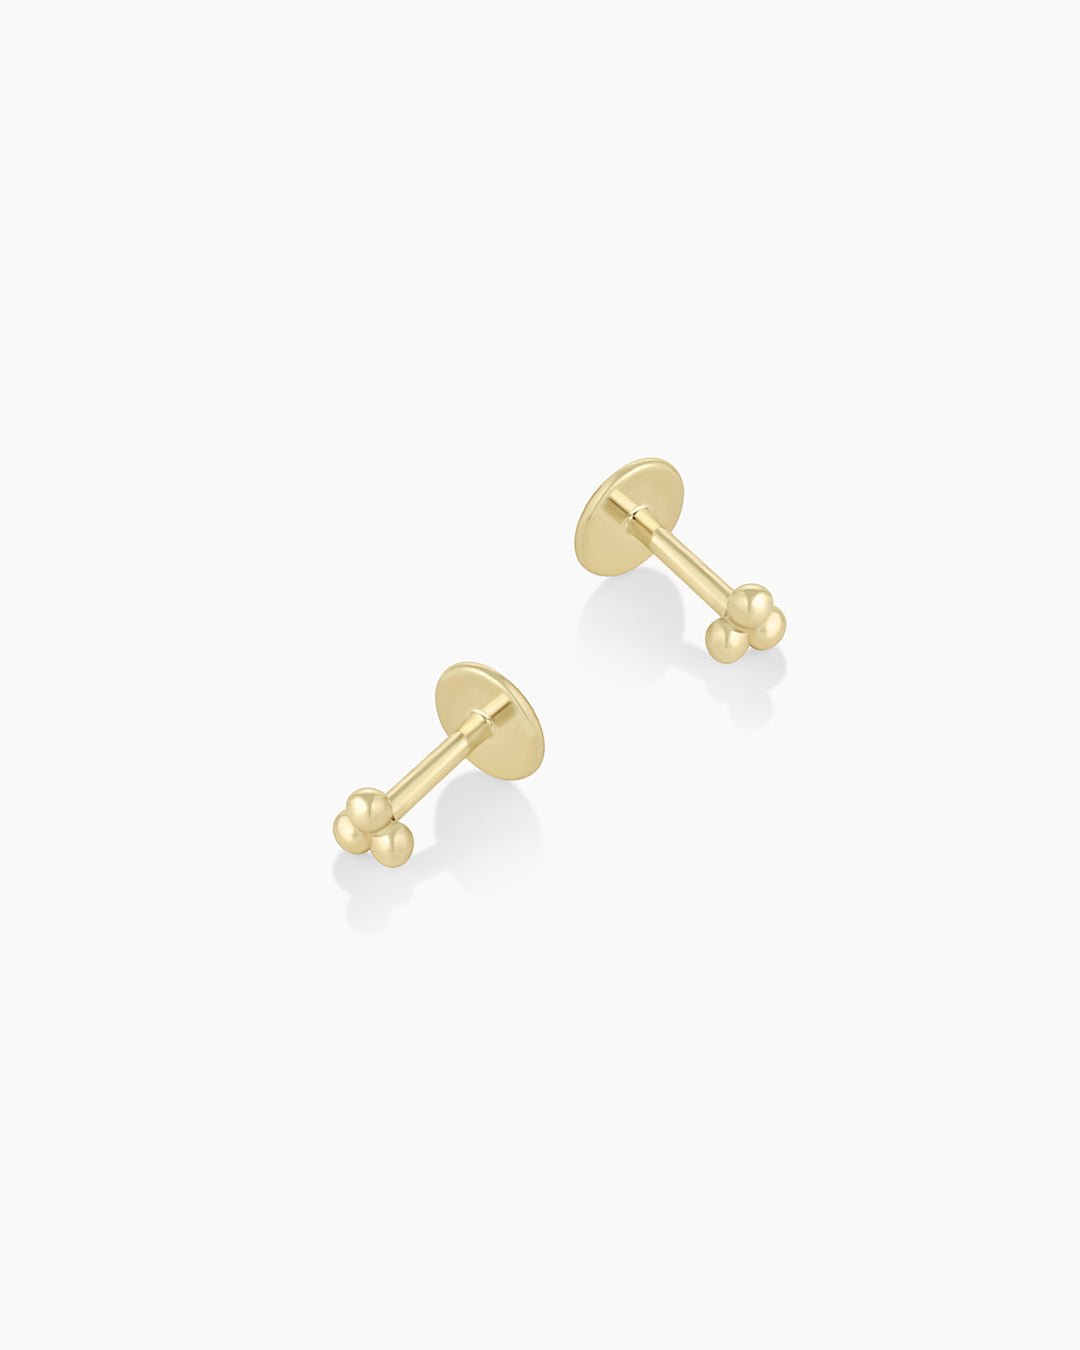 Signature Large Earring Backs in Gold